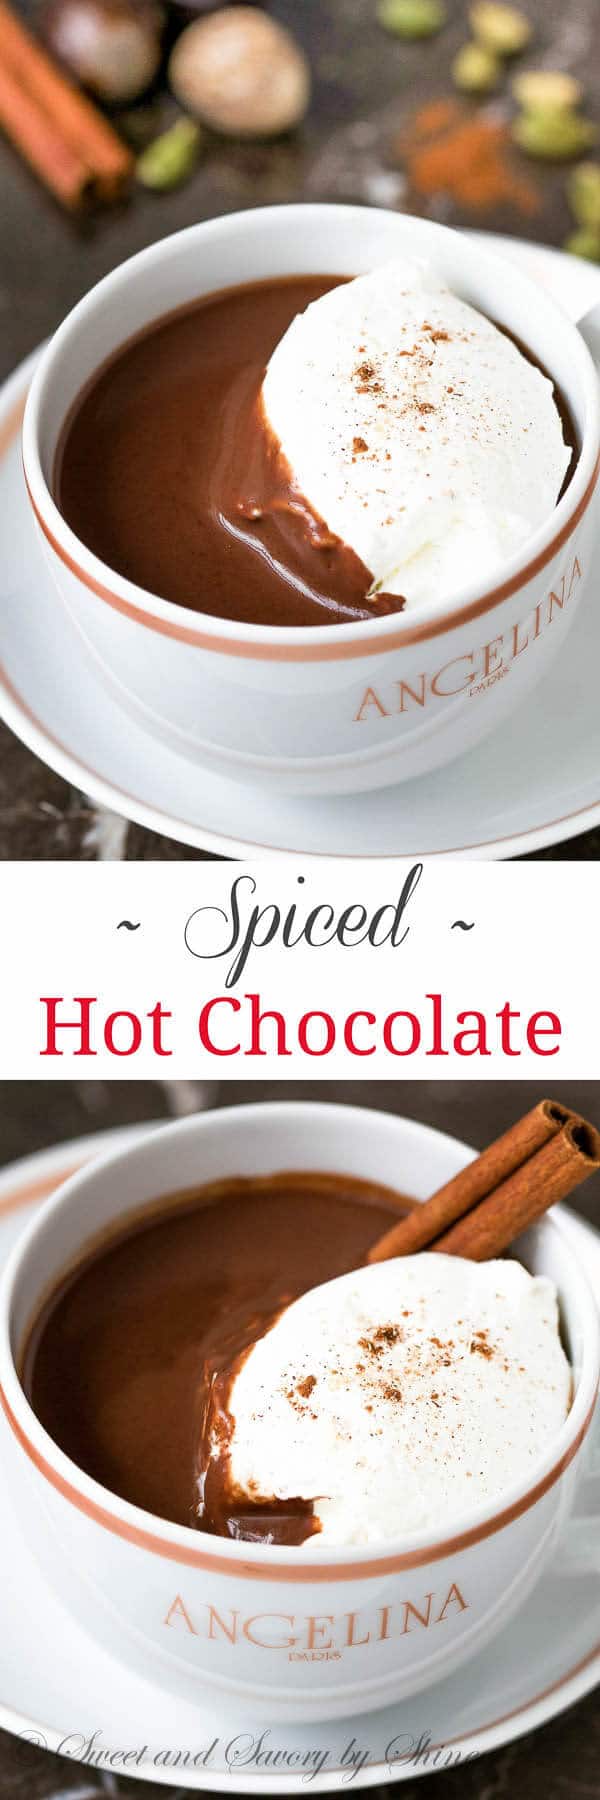 Made with unsweetened almond milk and dark chocolate, spiced with warm aromatics, like cinnamon, nutmeg and cardamom, this lighter hot chocolate is ideal for treating yourself frequently all winter long.